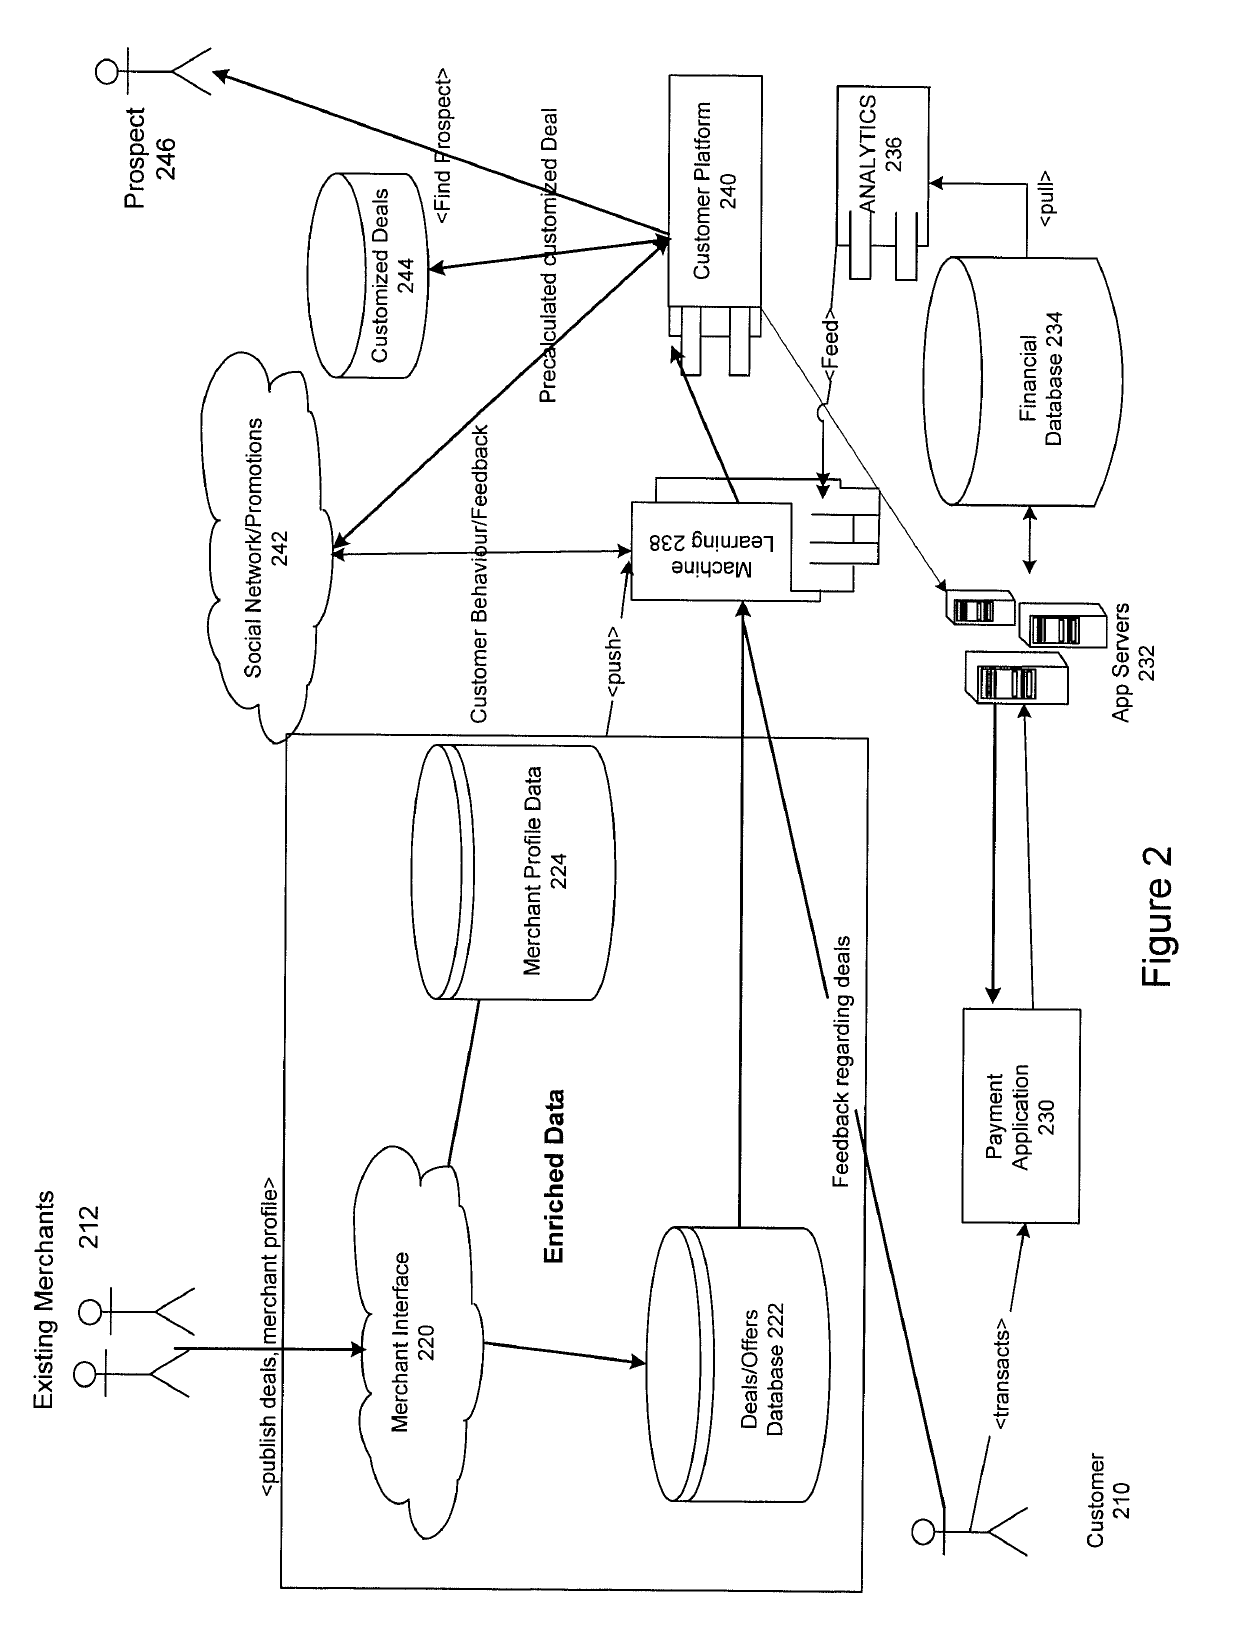 System and method for providing relevant electronic offers in a mobile banking application